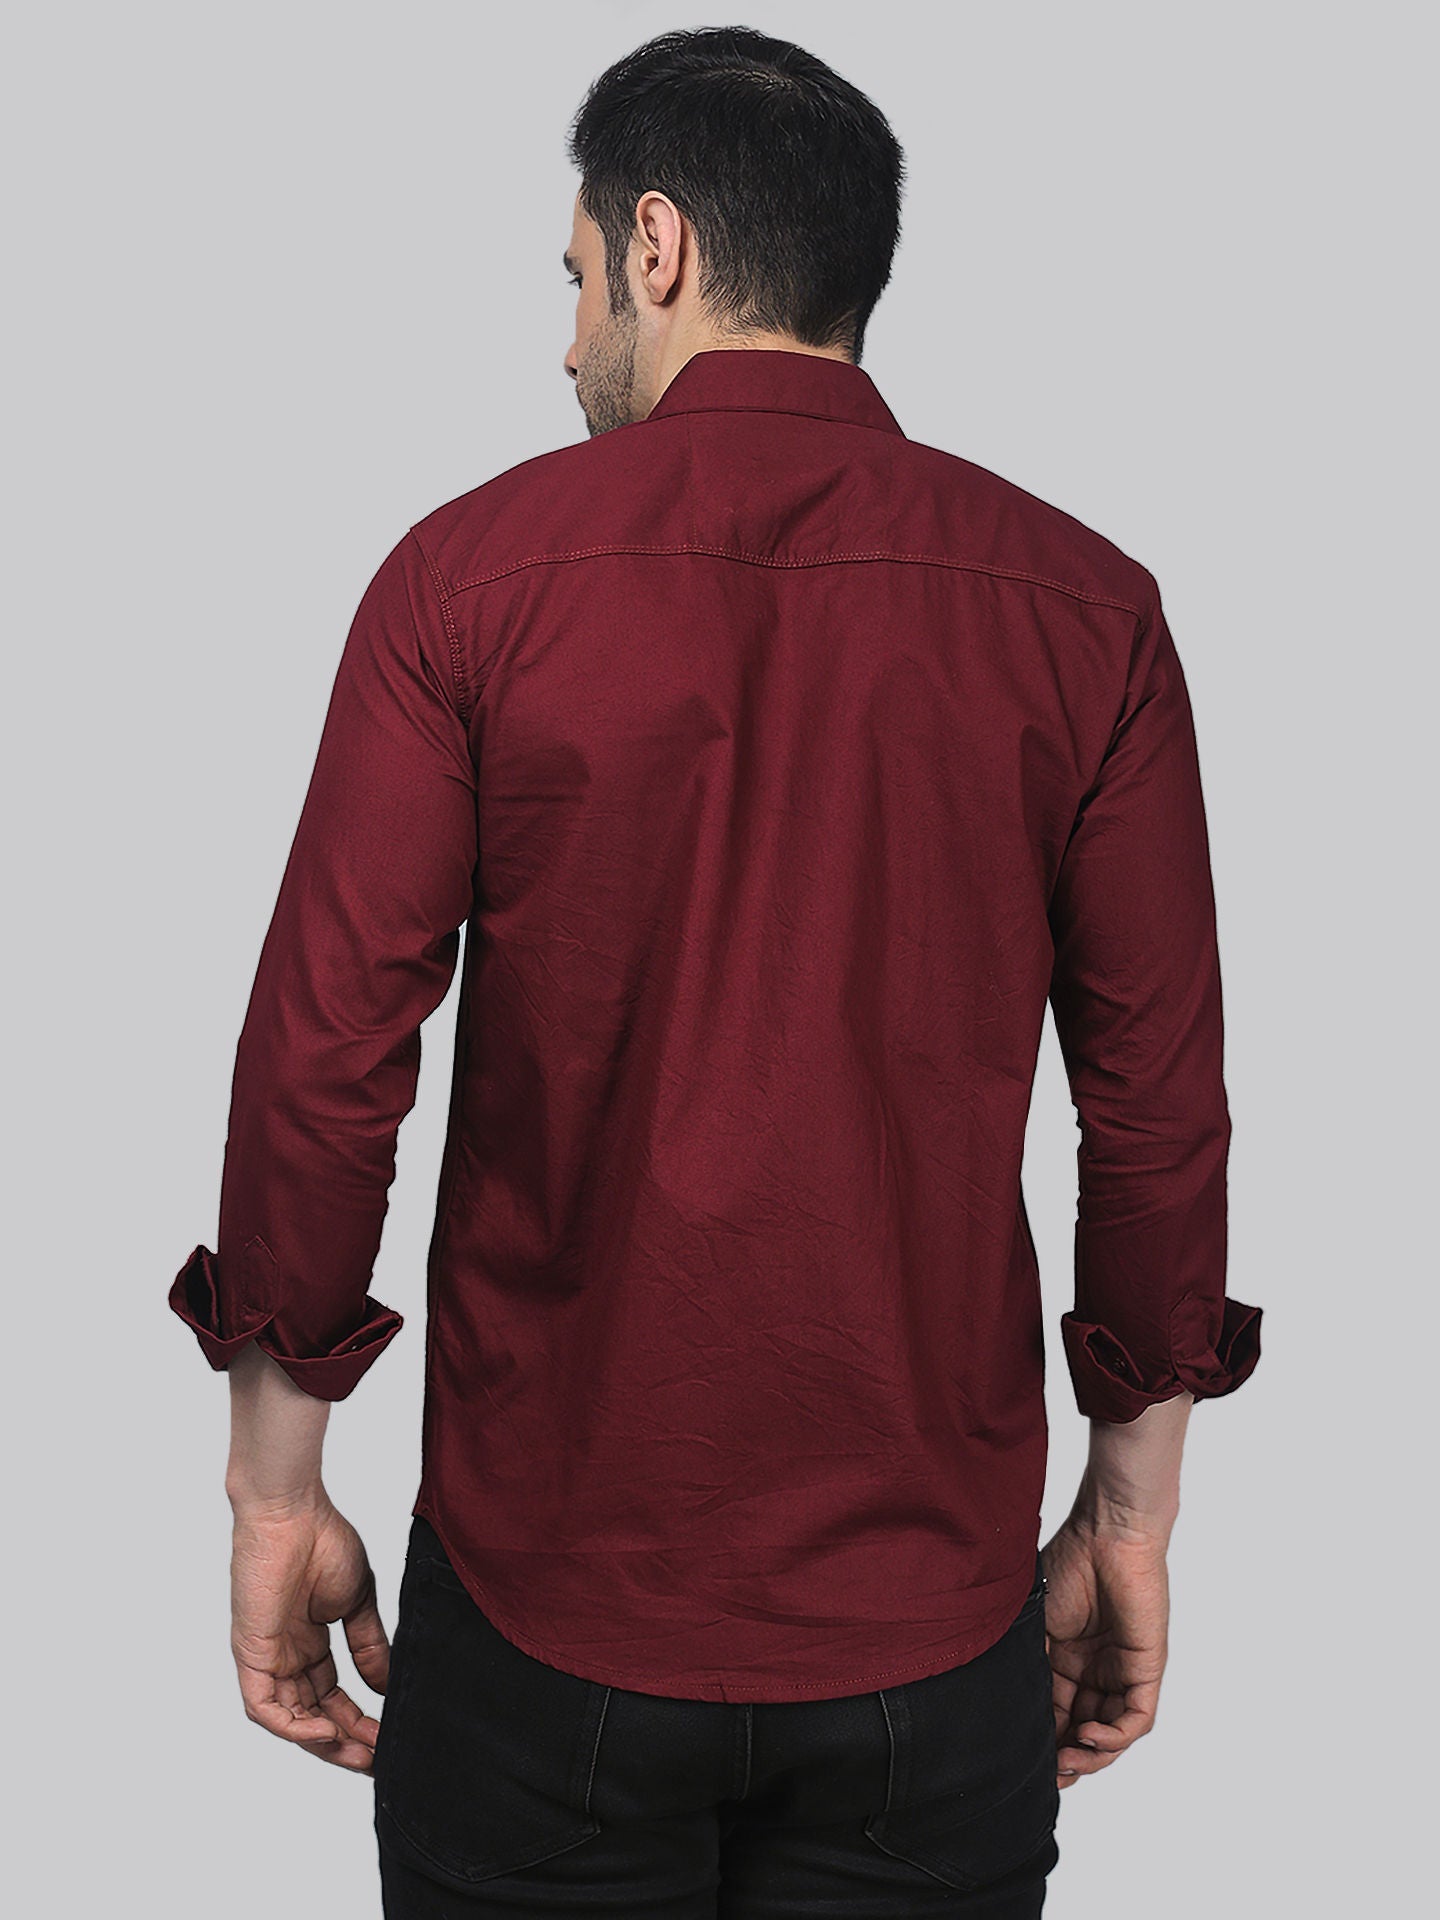 Sleek TryBuy Premium Solid Maroon Cotton Casual Shirt for Men - TryBuy® USA🇺🇸